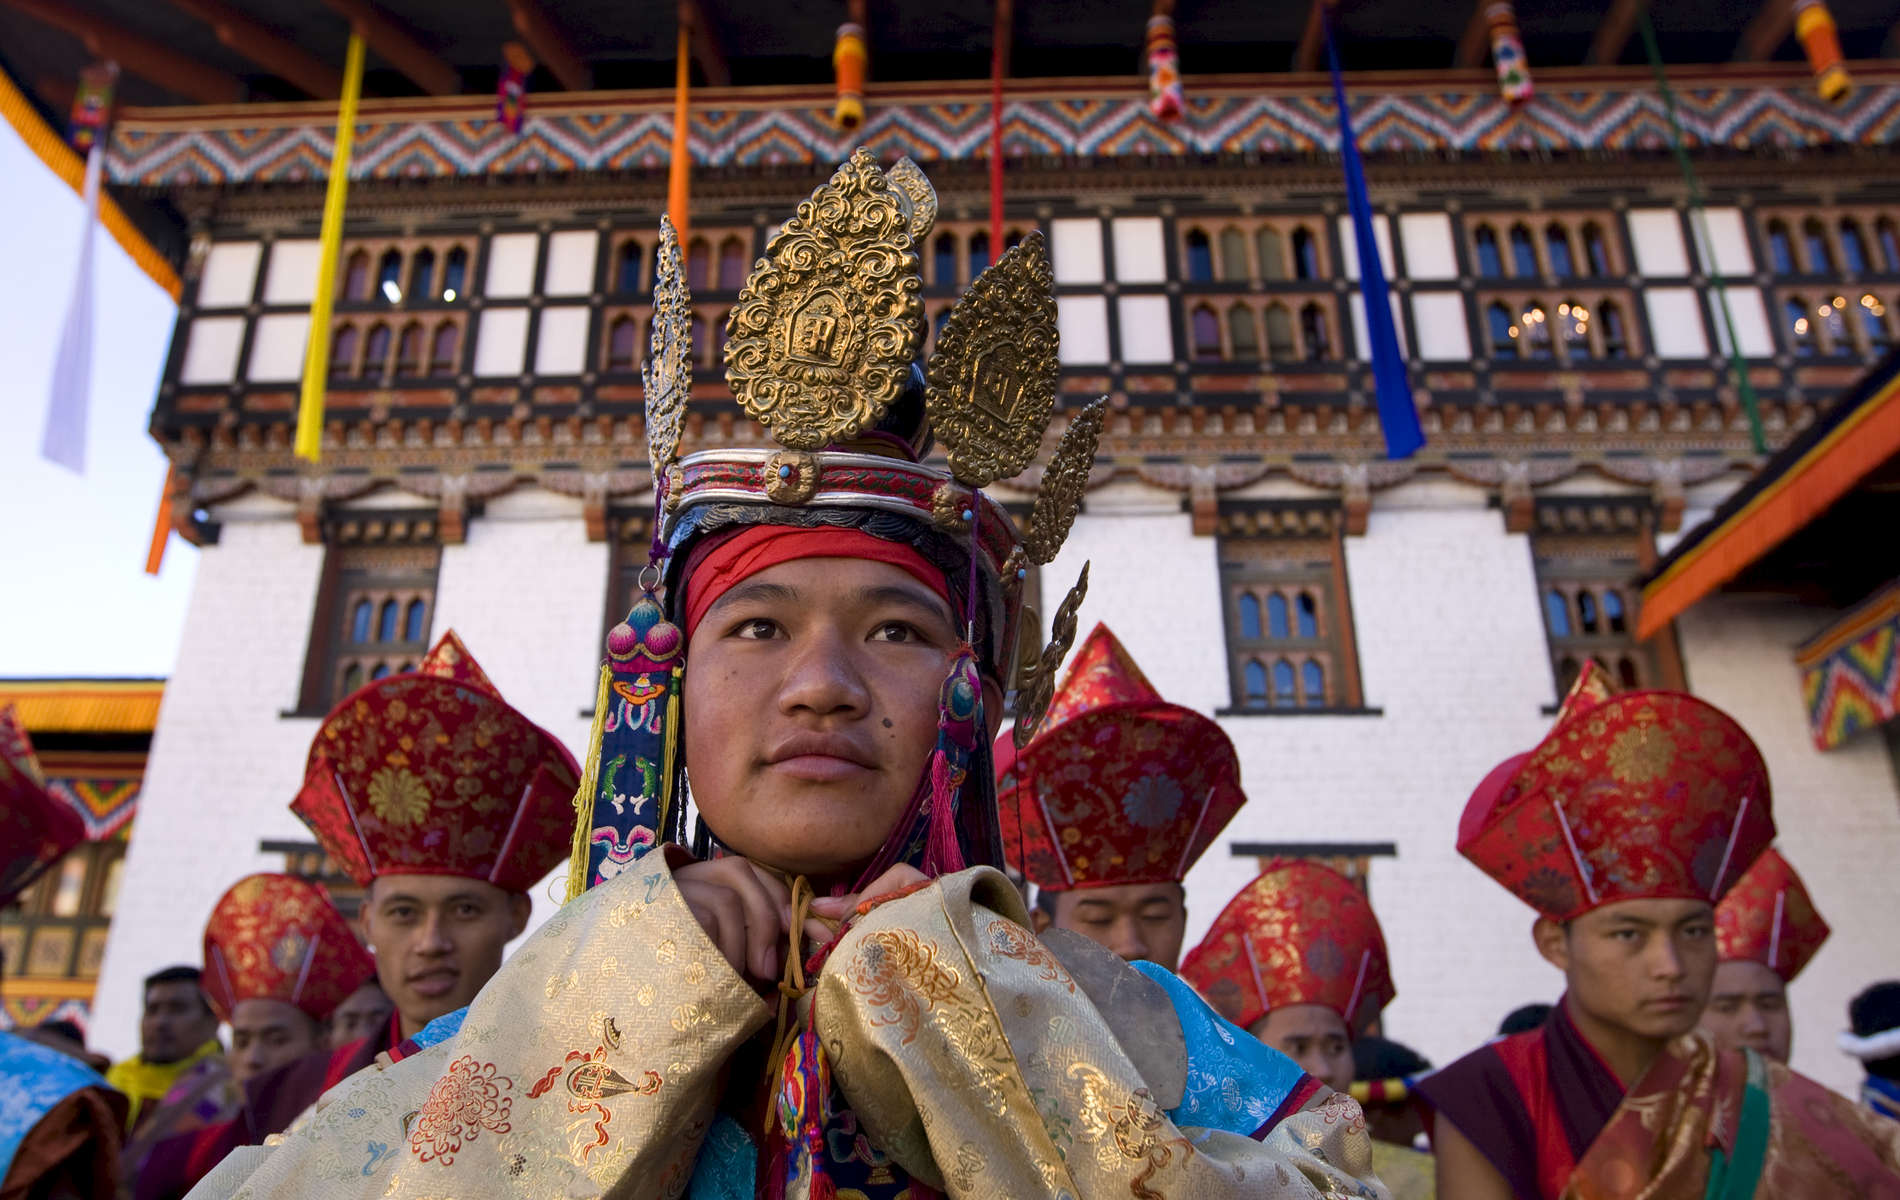 THIMPHU, BHUTAN -NOV 6, 2008: Bhutanese ceremonial dancers stand in line as the coronation ceremony begins November 6, 2008 in Thimphu, Bhutan. Jigme Khesar Namgyel Wangchuck, 28, the young Bhutanese king,  became the youngest reigning monarch on the planet today. He was handed the Raven Crown by his father, the former King Jigme Singye Wangchuck, in an ornate ceremony in Thimpu, the capital. The tiny Himalayan kingdom, a Buddhist nation of 635,000 people is wedged between China and India .  (Photo by Paula Bronstein/Getty Images) 